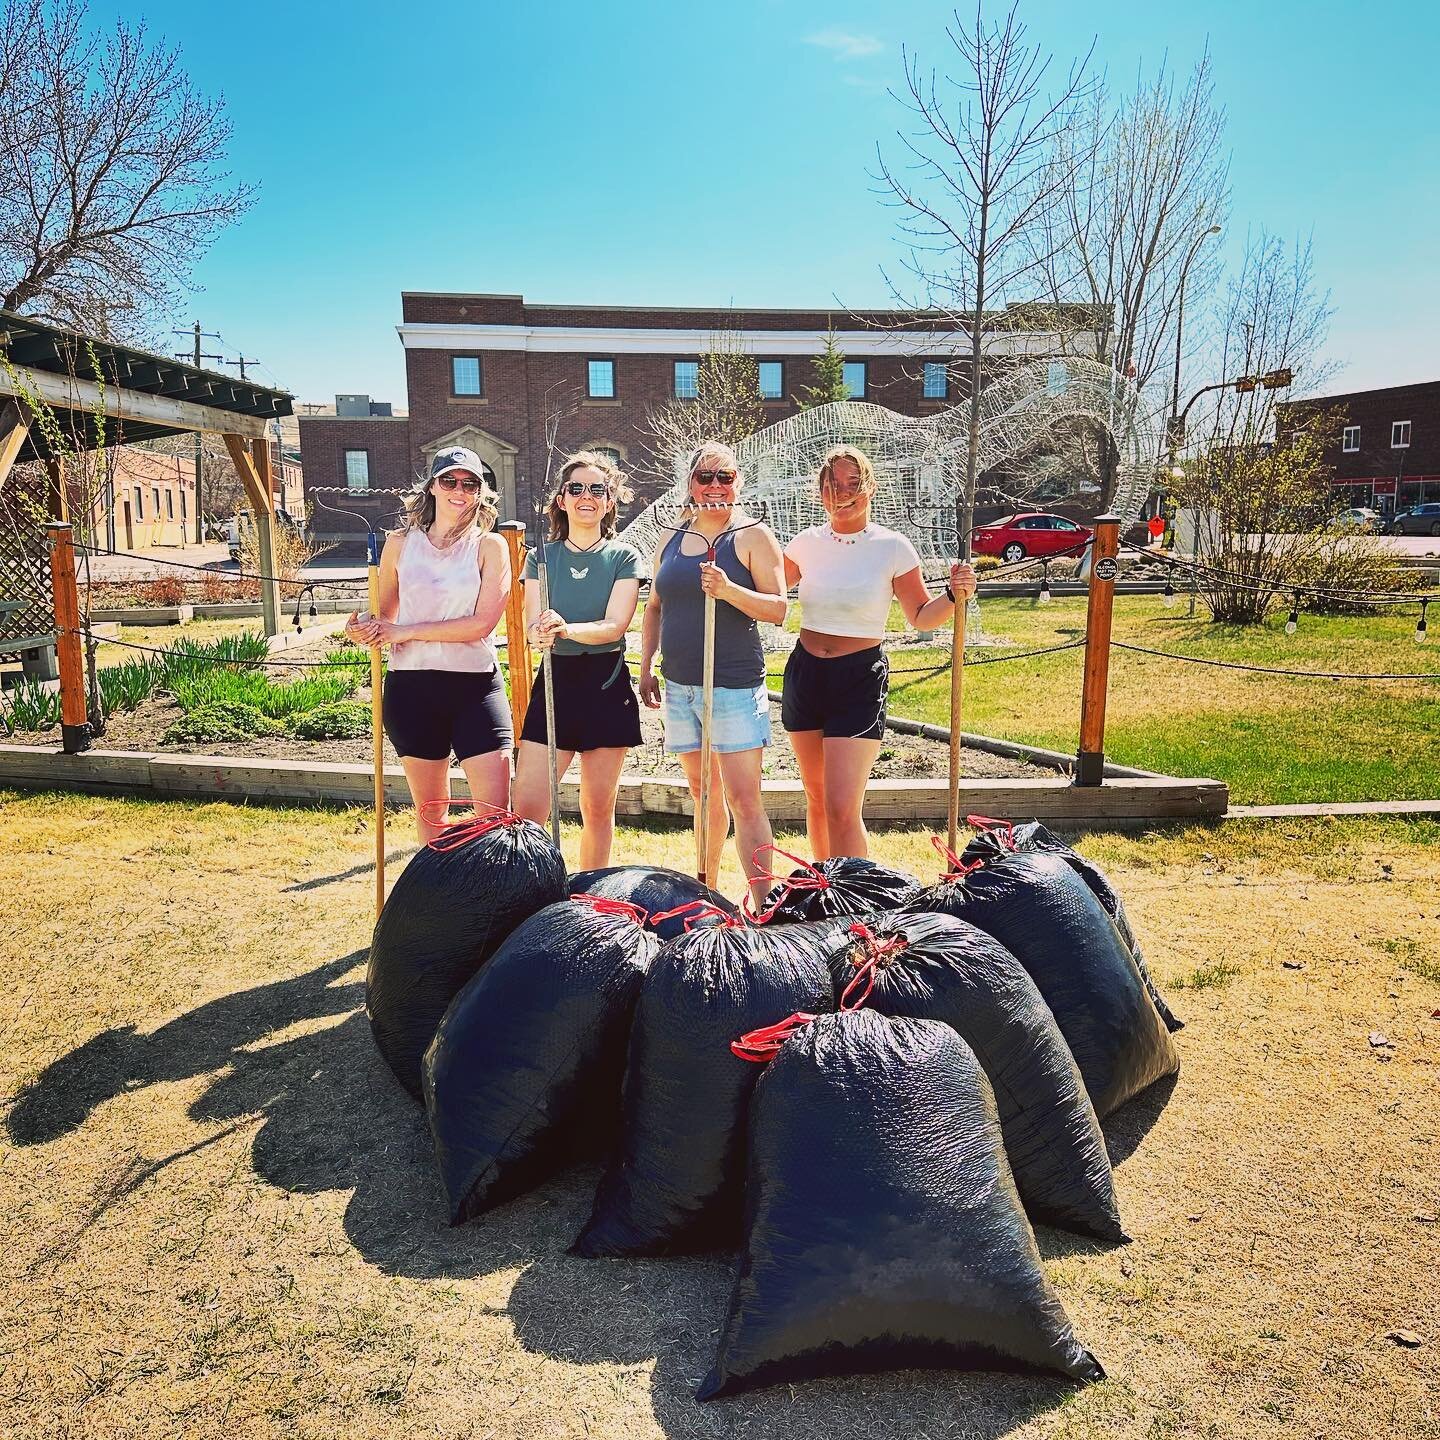 Thanks to the Valley Crew for cleaning up Munchie Park as preparations are underway to have the patio extension open for May Long Weekend. 

We appreciate the collaboration with @drumhellervalley on the use of the green space each summer for everyone